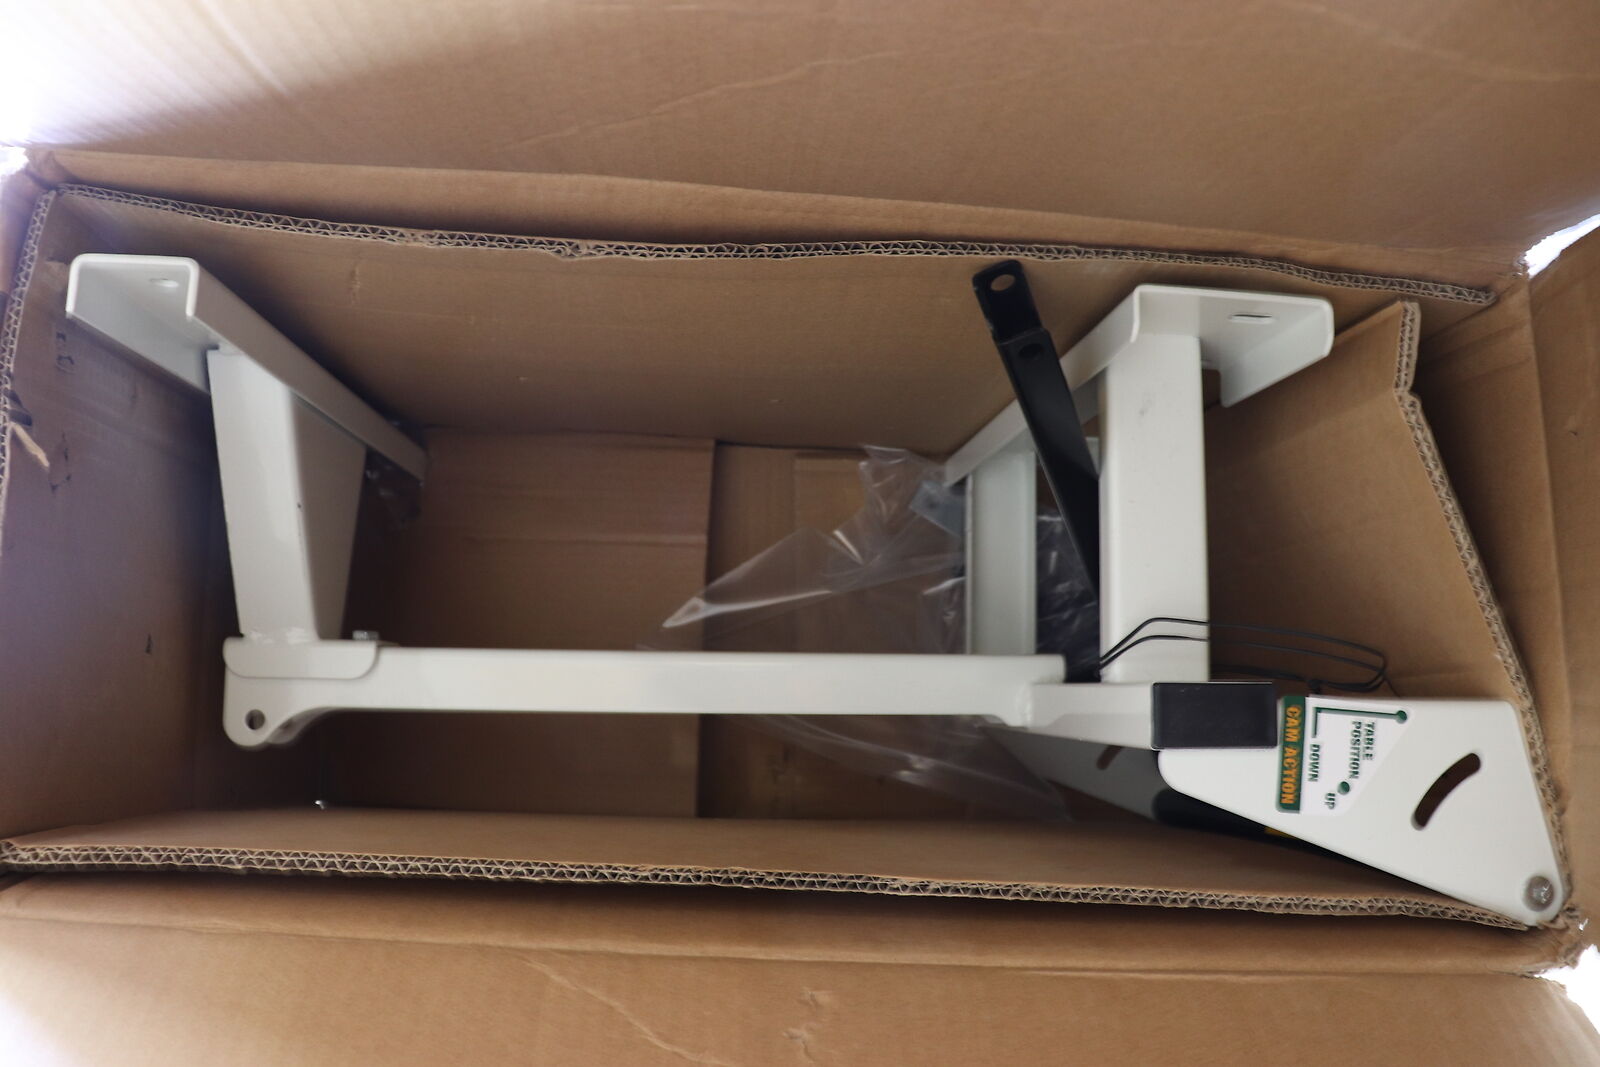 HTC Outfeed Roller System 5100 Main Frame - Box 2 Only 